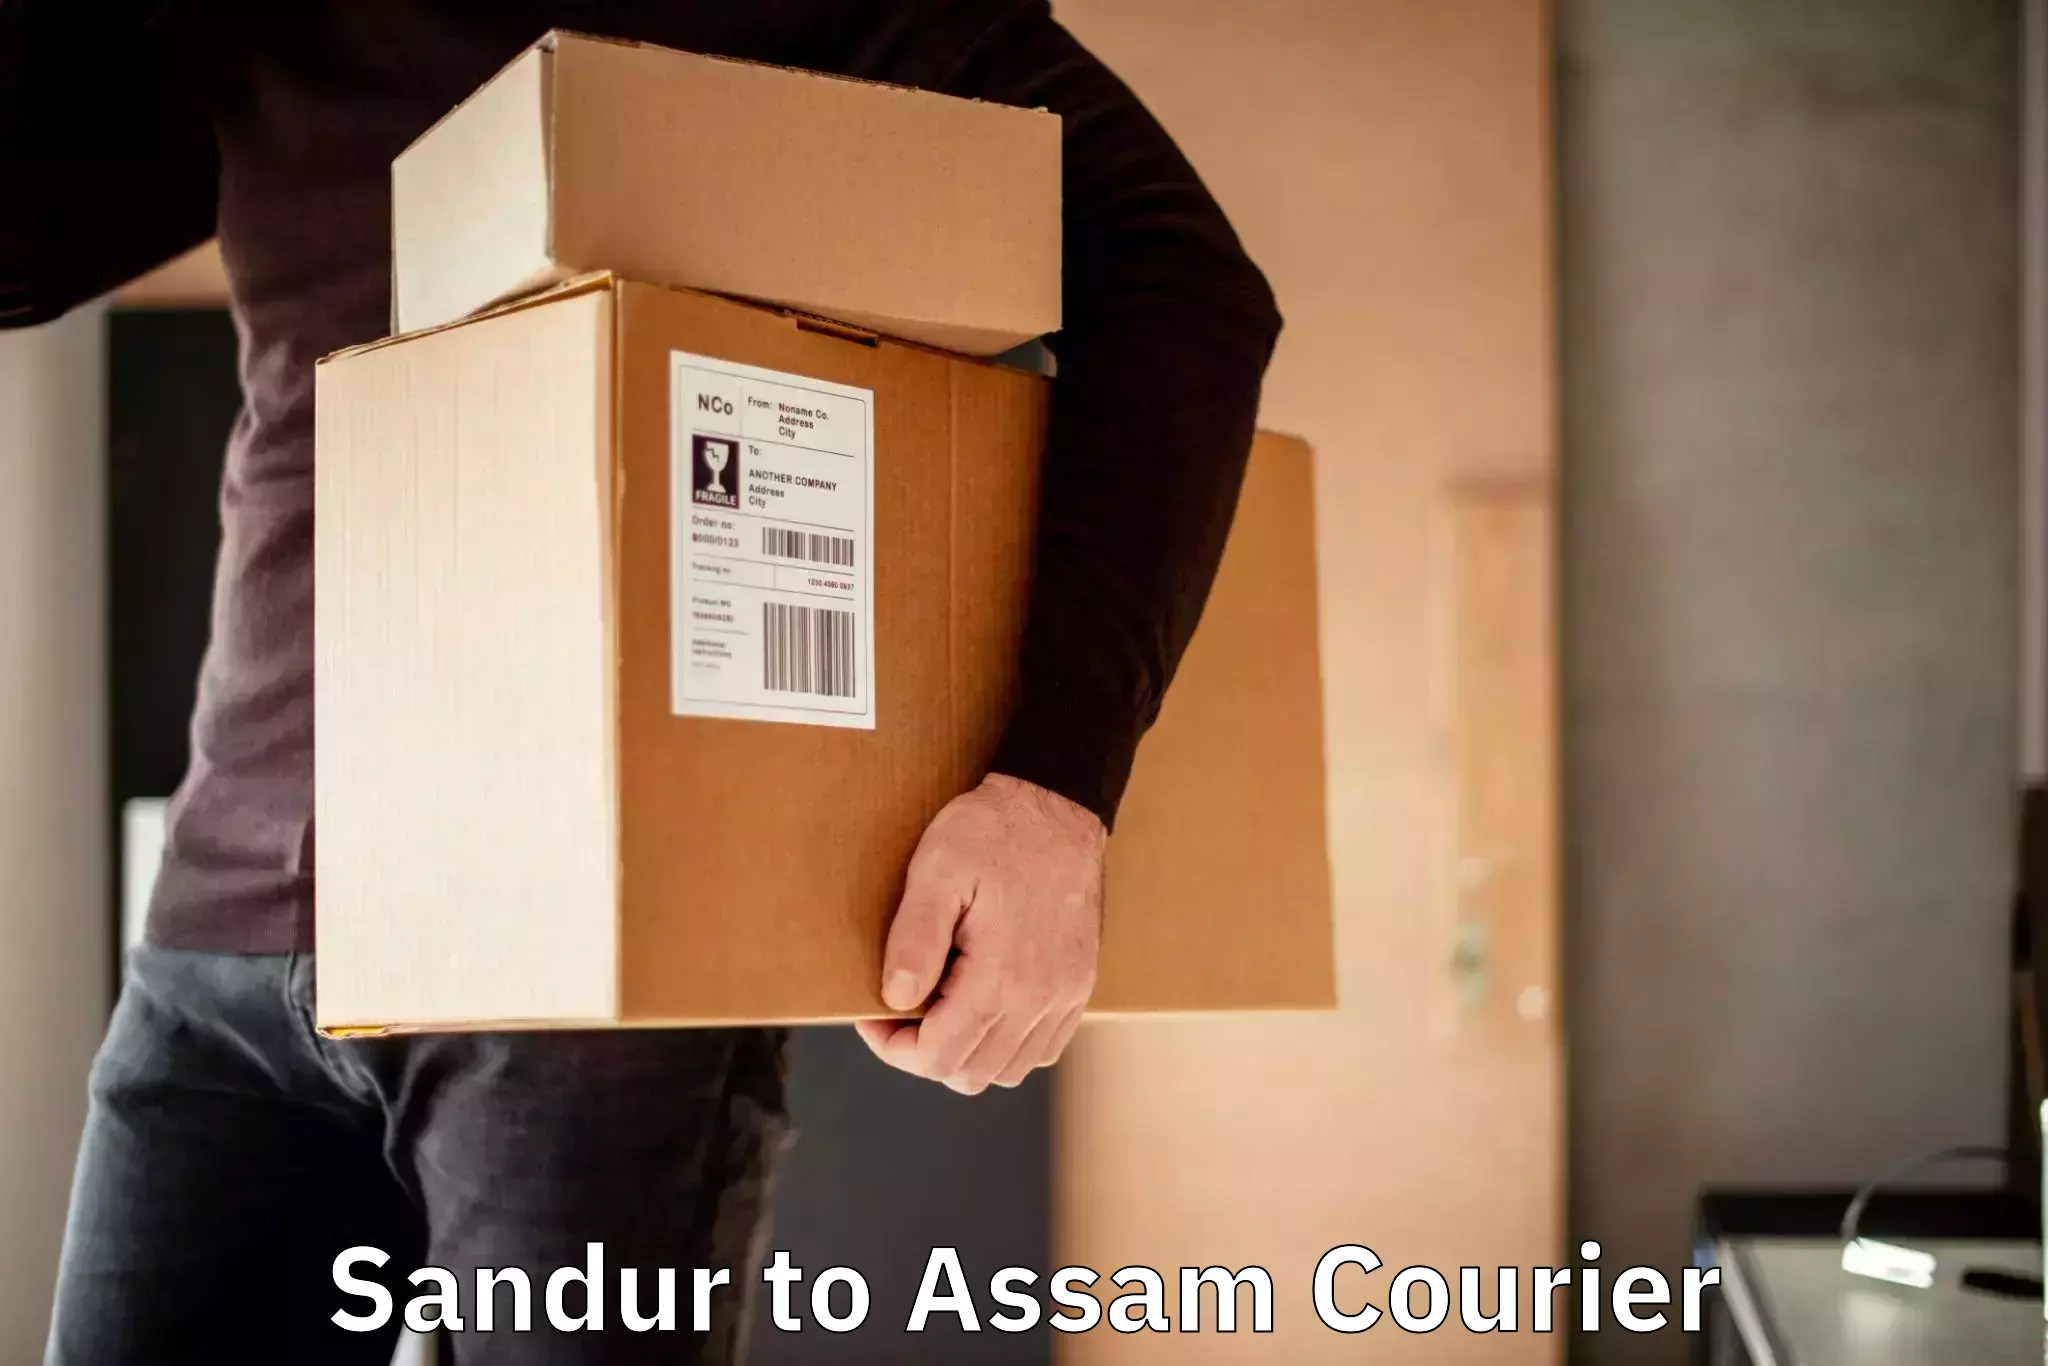 User-friendly delivery service Sandur to Assam